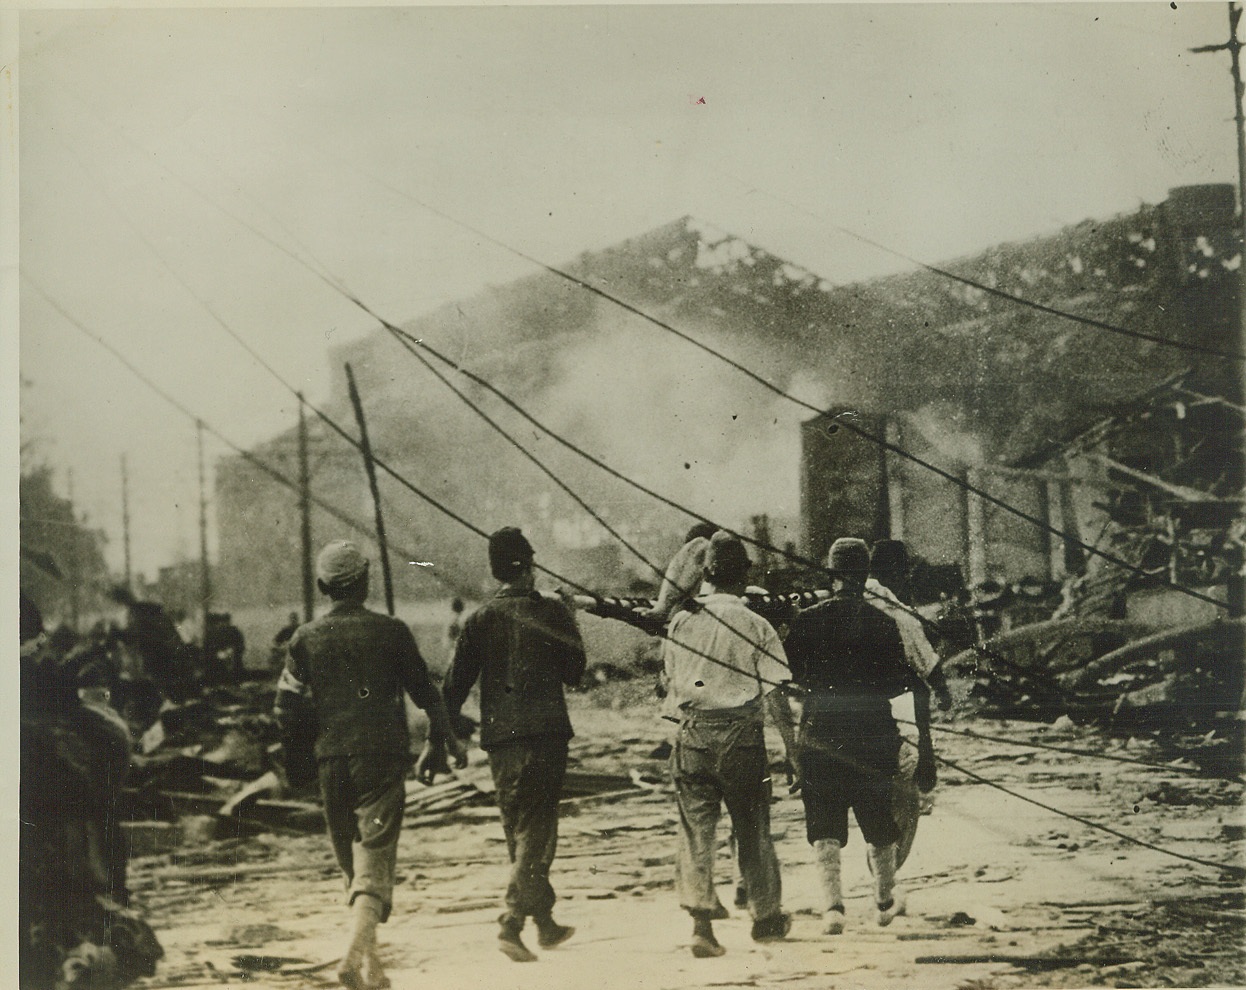 Down in Nagasaki - When Atomic Bomb Struck, 9/10/1945. NAGASAKI, JAPAN -- Rescue workers carry the body of an atomic bomb victim through the still-smoking streets of ruined Nagasaki. Crushed and crumbling ruins can be seen on every side of the doomed city, while fallen telephone wires string across the front of photo. This exclusive ACME photo was obtained by Andrew Lopez, ACME Photographer for the War Picture Pool, through civilian sources. Credit: (ACME);